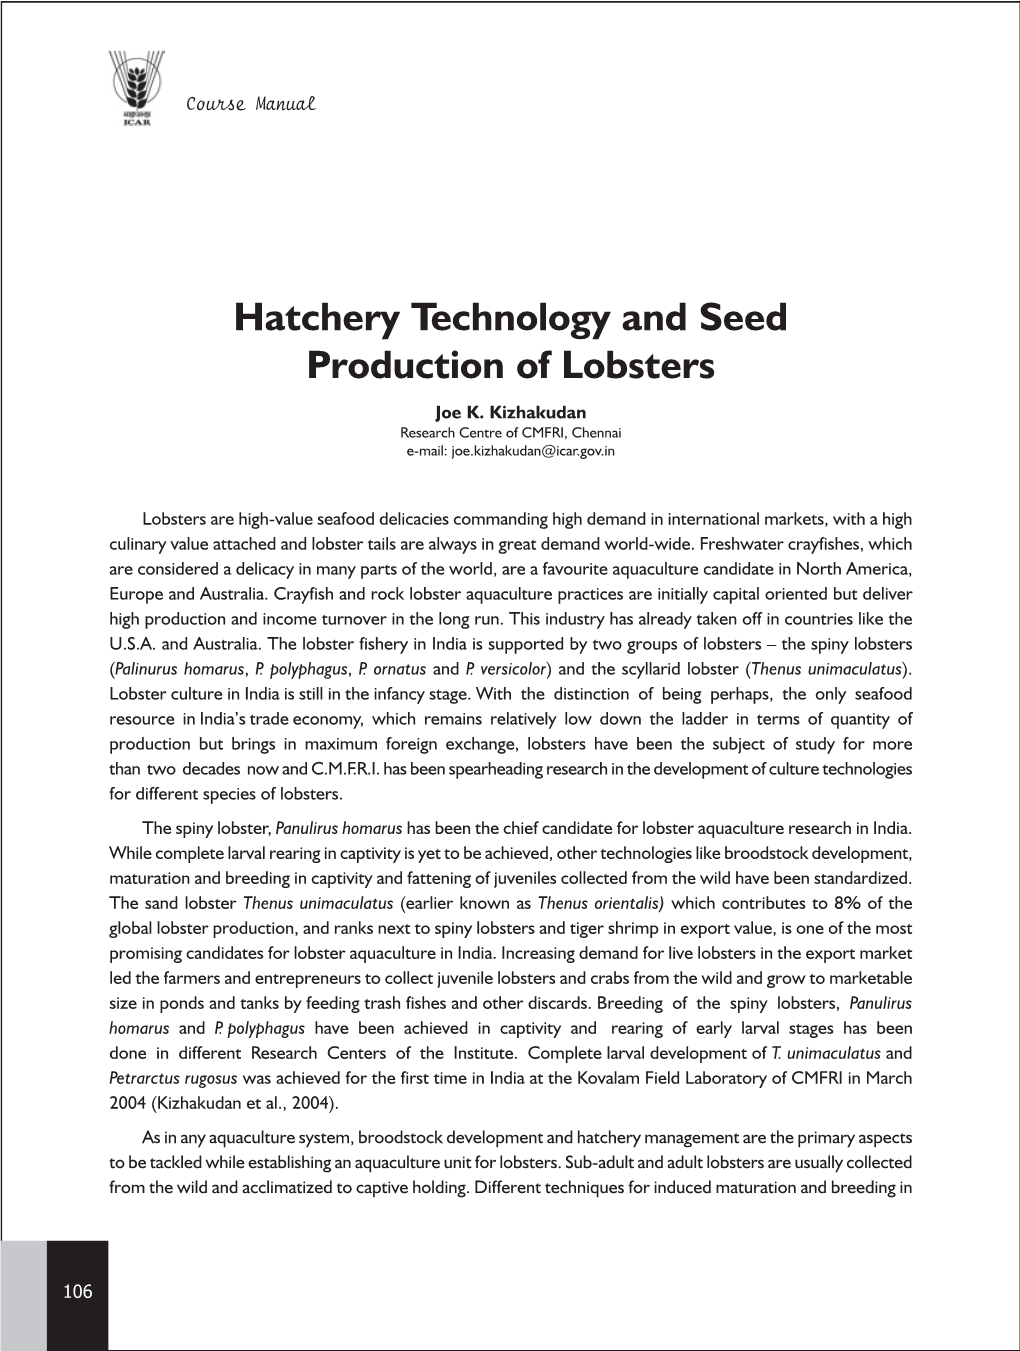 Hatchery Technology and Seed Production of Lobsters Joe K